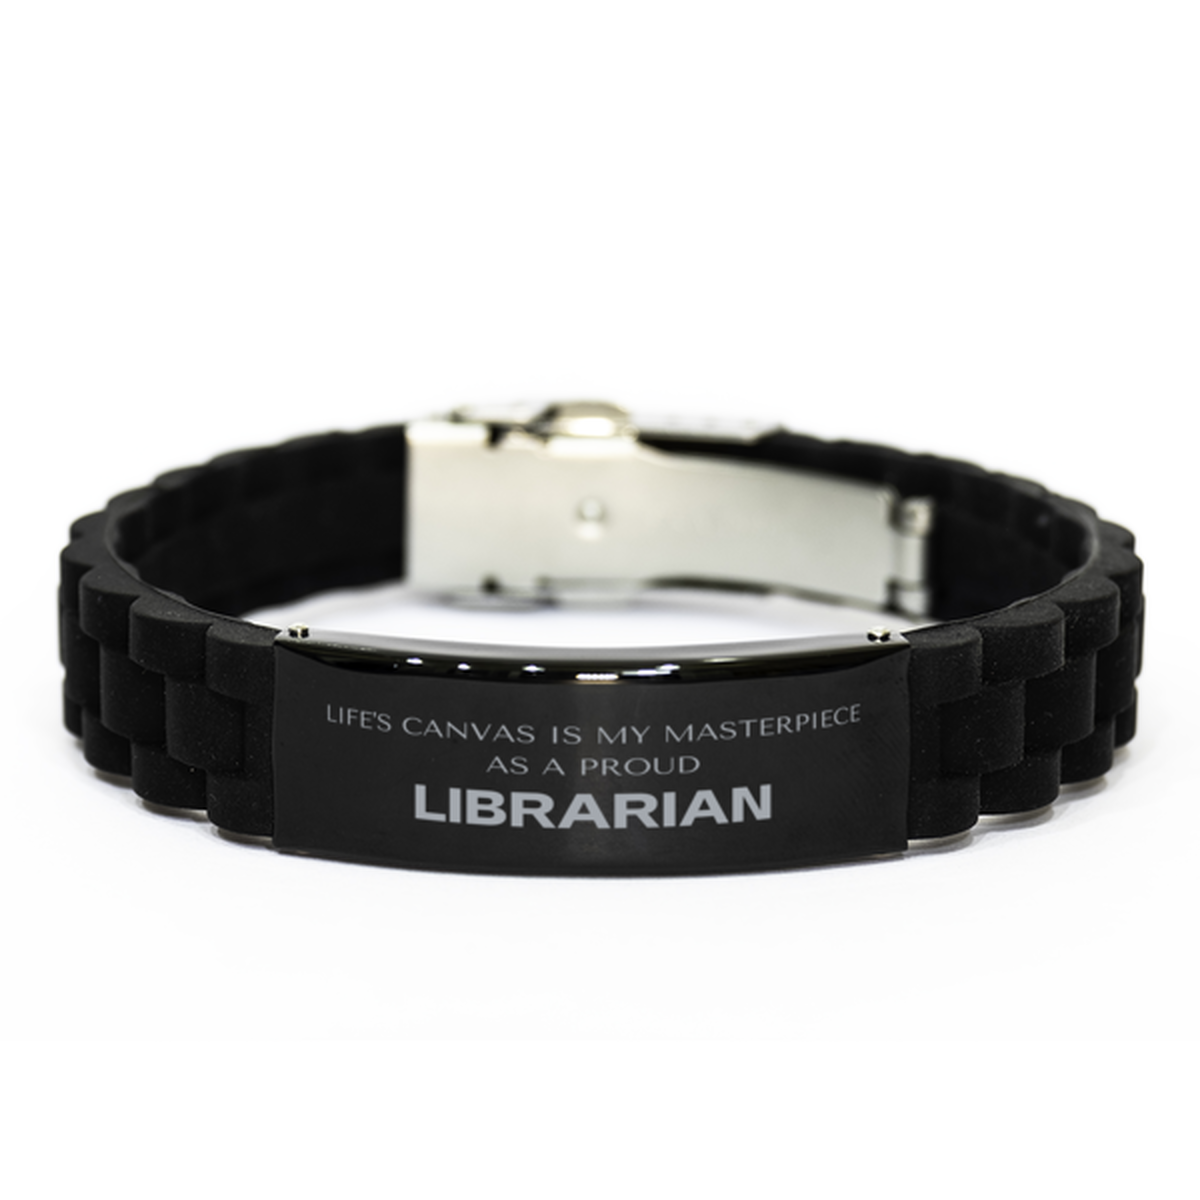 Proud Librarian Gifts, Life's canvas is my masterpiece, Epic Birthday Christmas Unique Black Glidelock Clasp Bracelet For Librarian, Coworkers, Men, Women, Friends